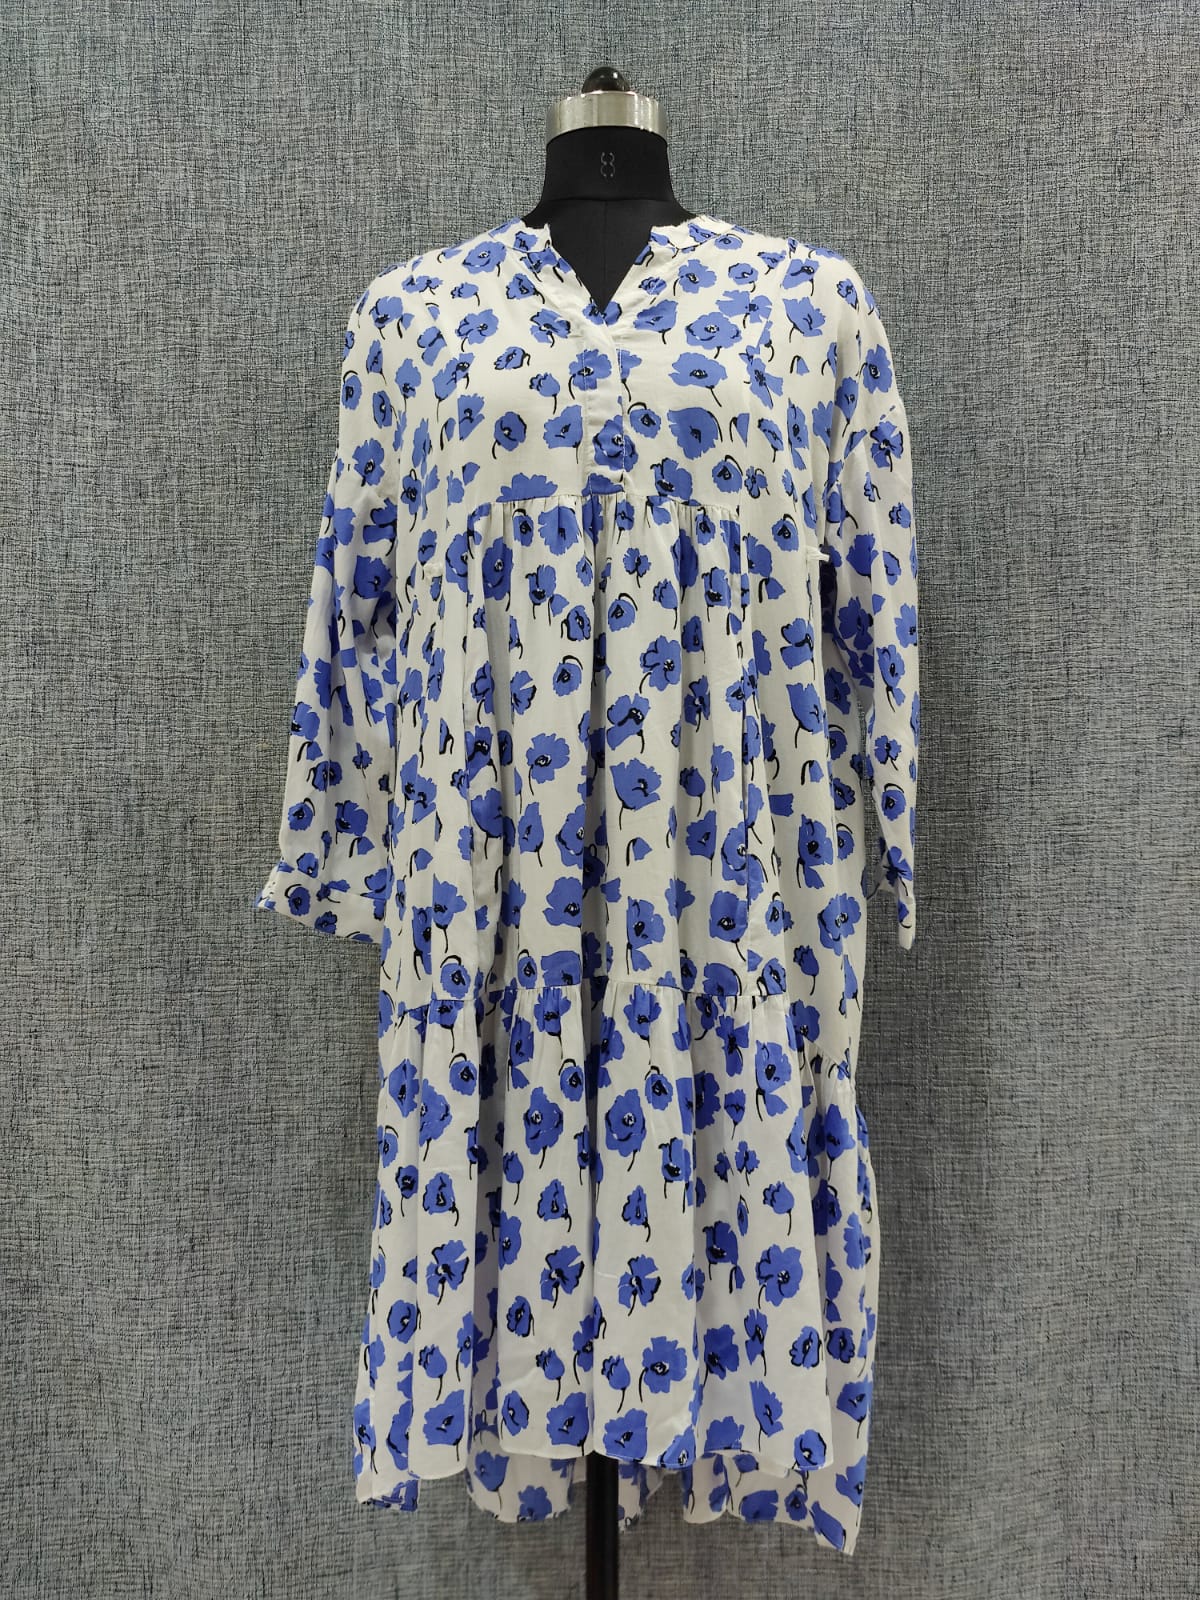 ZARA White and Blue Floral Dress | Relove